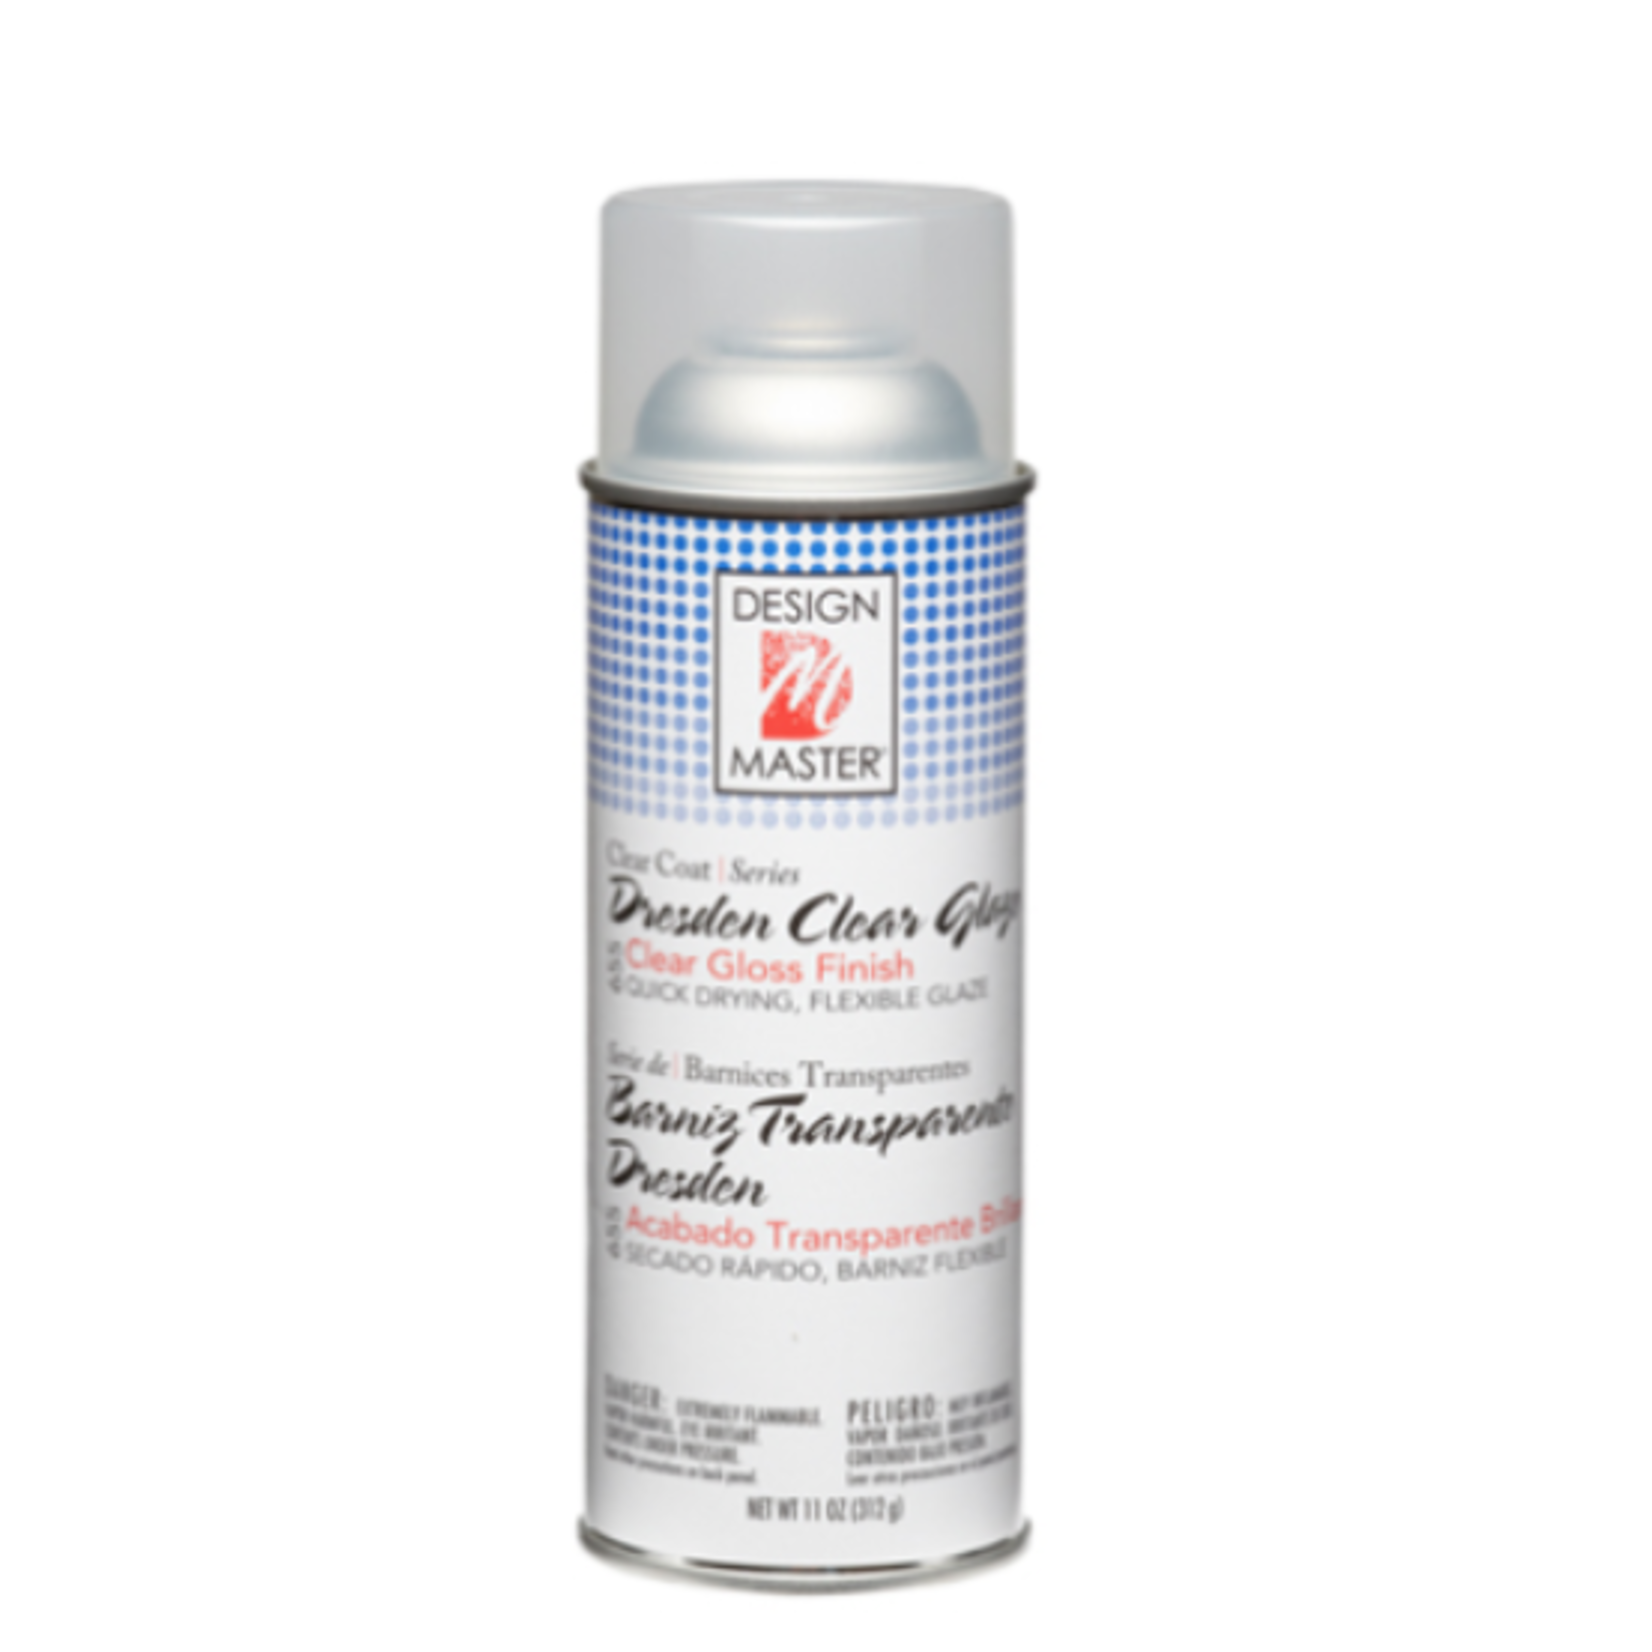 40% OFF WAS $14 NOW $8.39. 655 Surface Treatments Dresden Clear Glaze